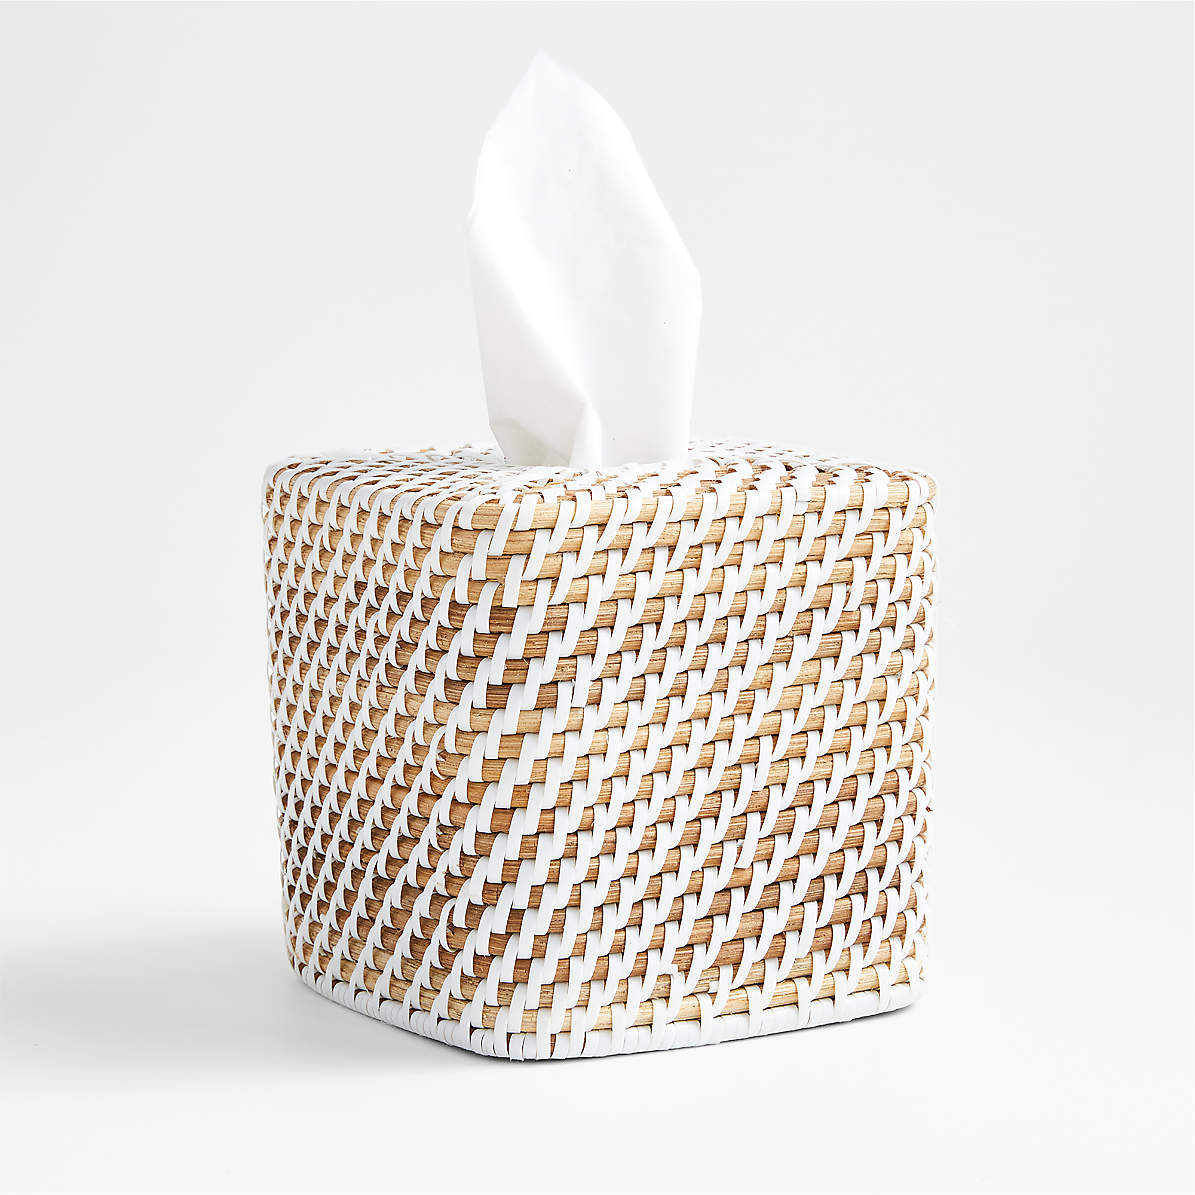 Natural tissue box with lid,straw woven square tissue storage basket,straw tissue box,tissue holder,handmade gift